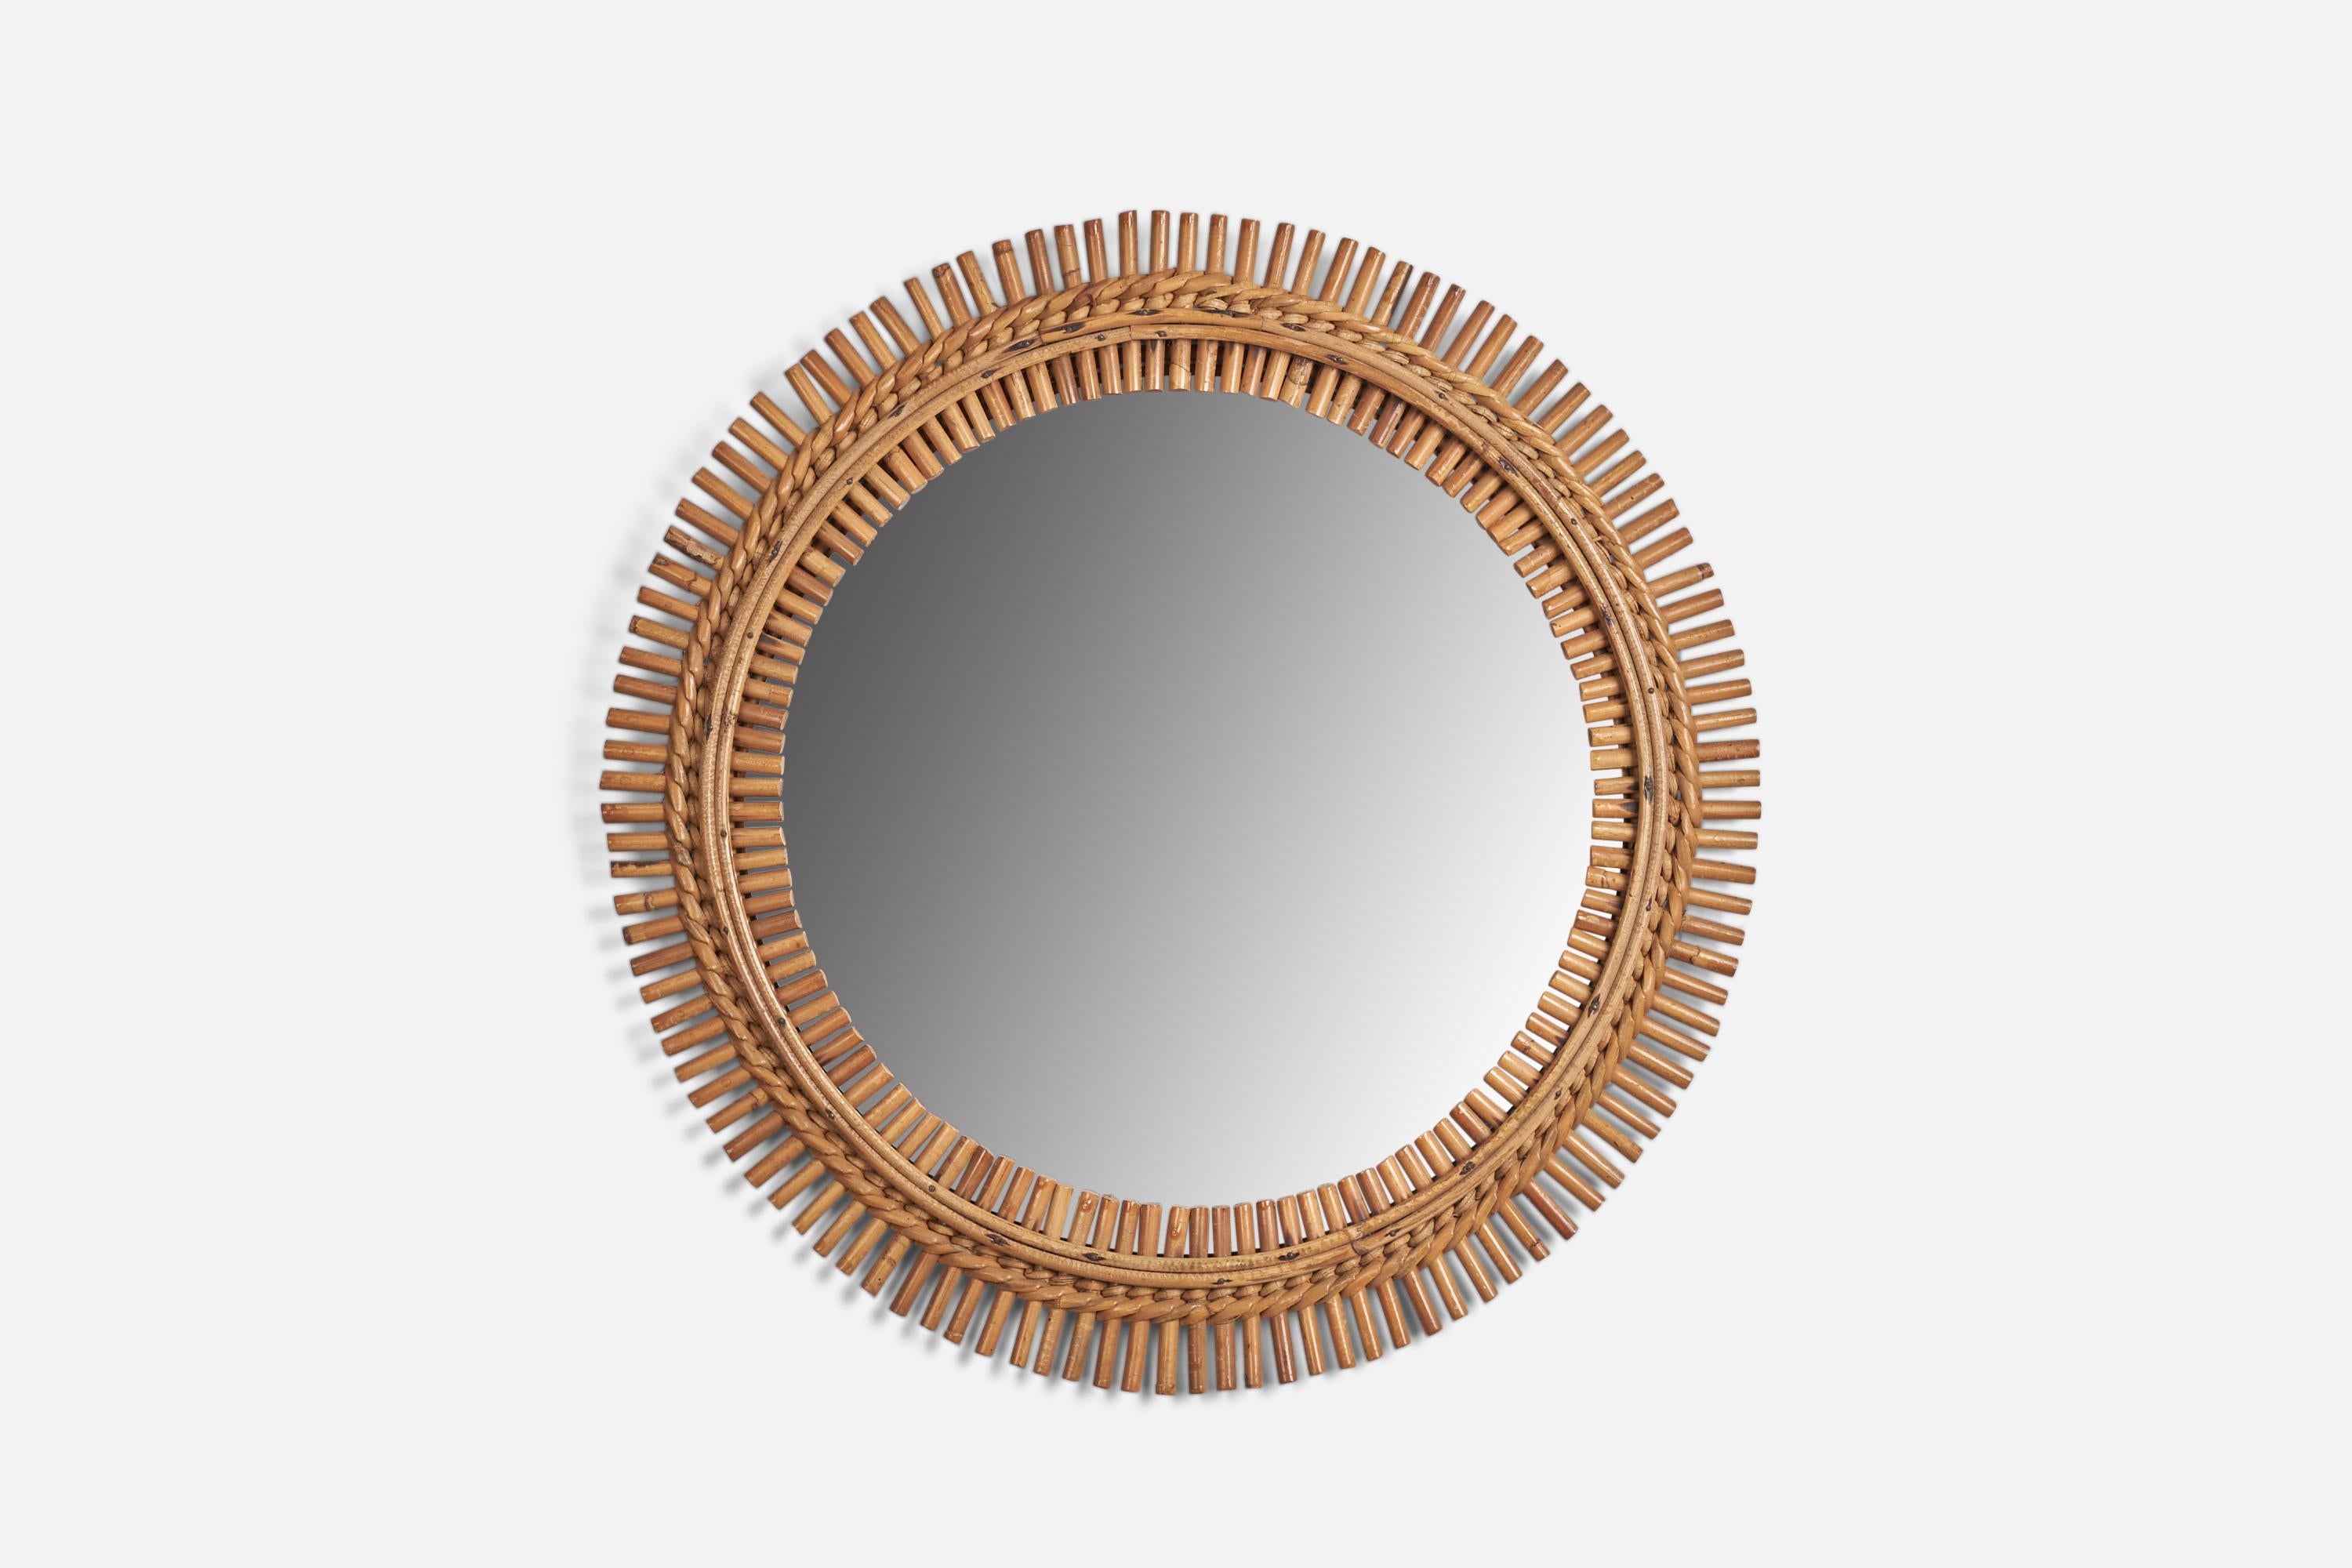 A rattan, bamboo wall mirror designed and produced by an Italian Designer, Italy, 1960s.